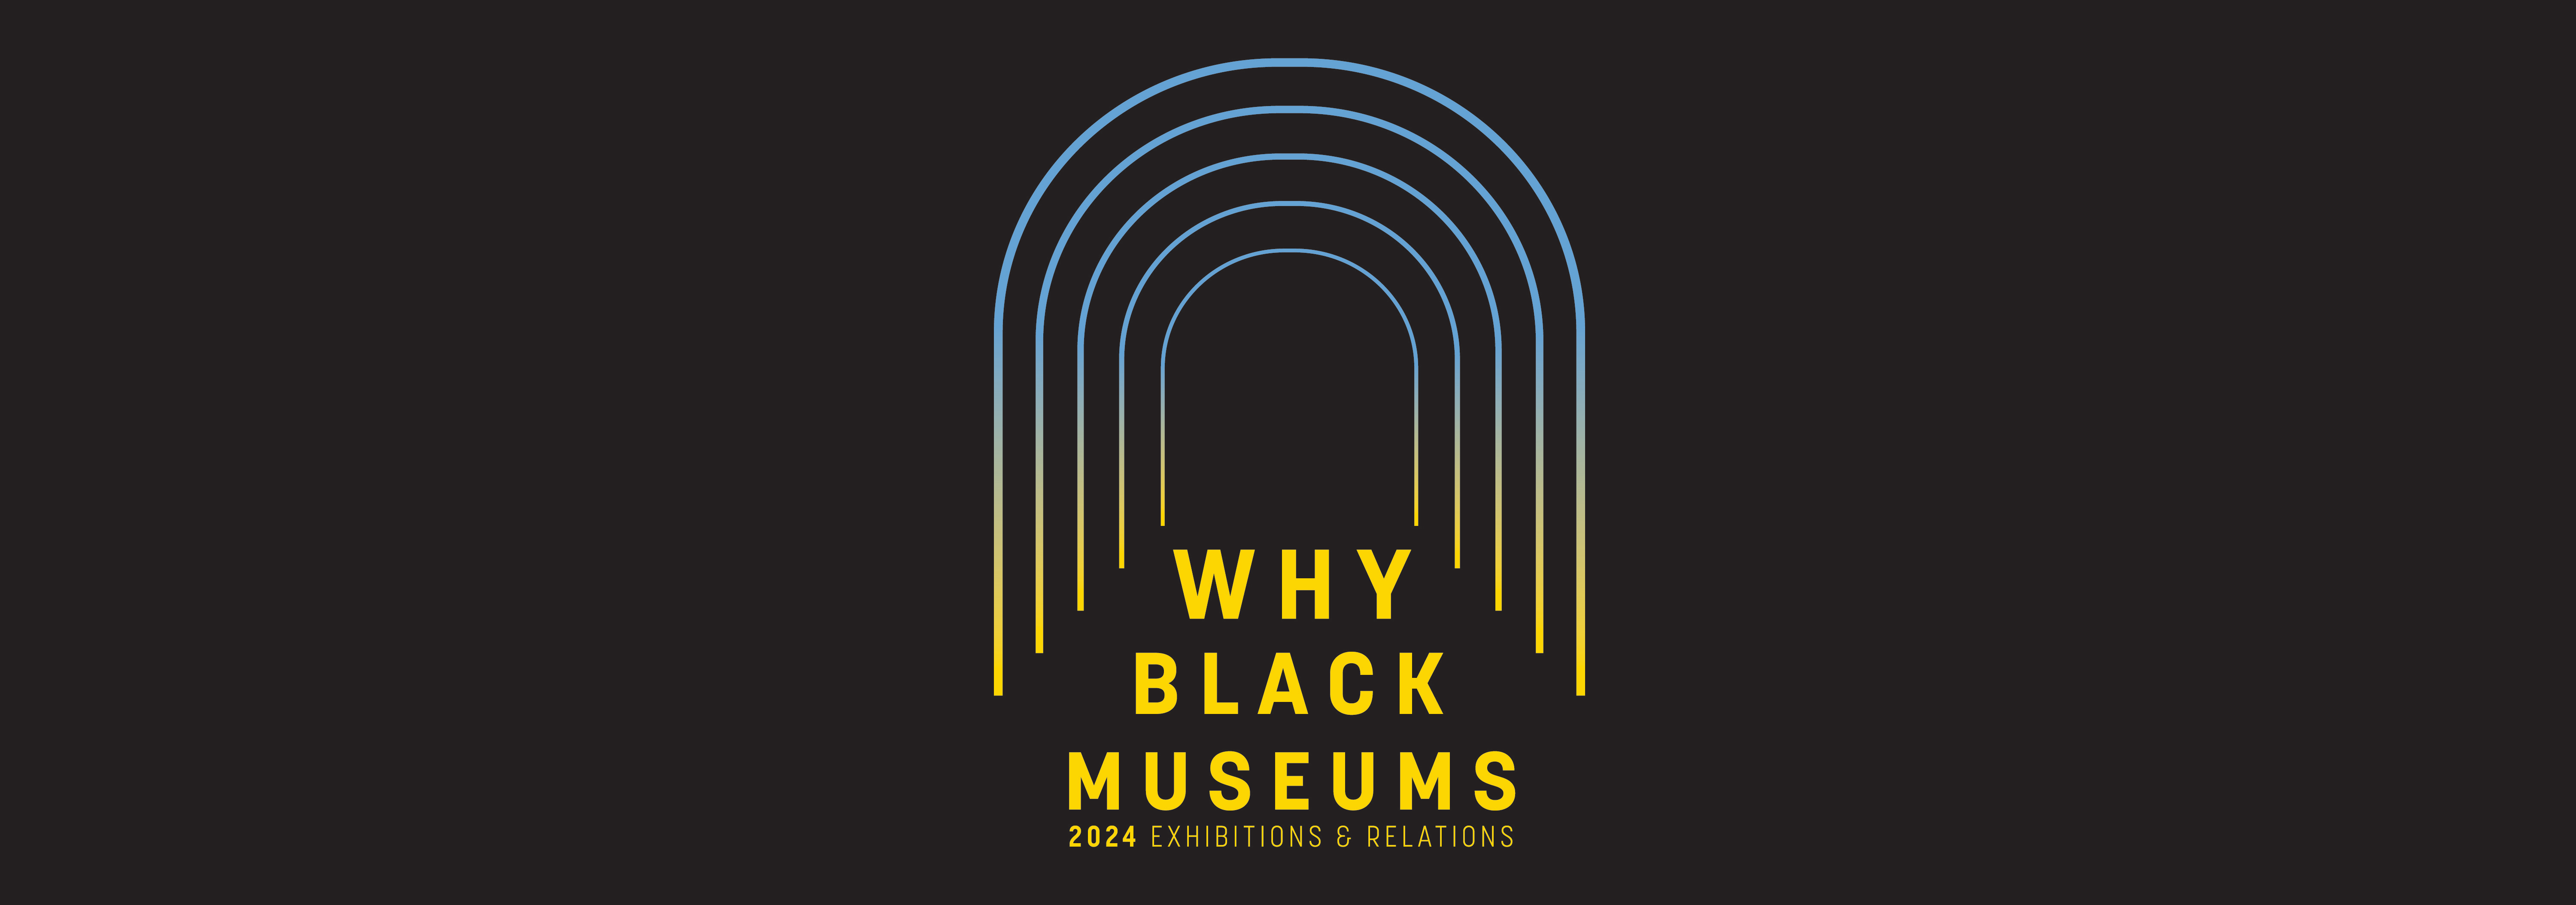 Why Black Museums